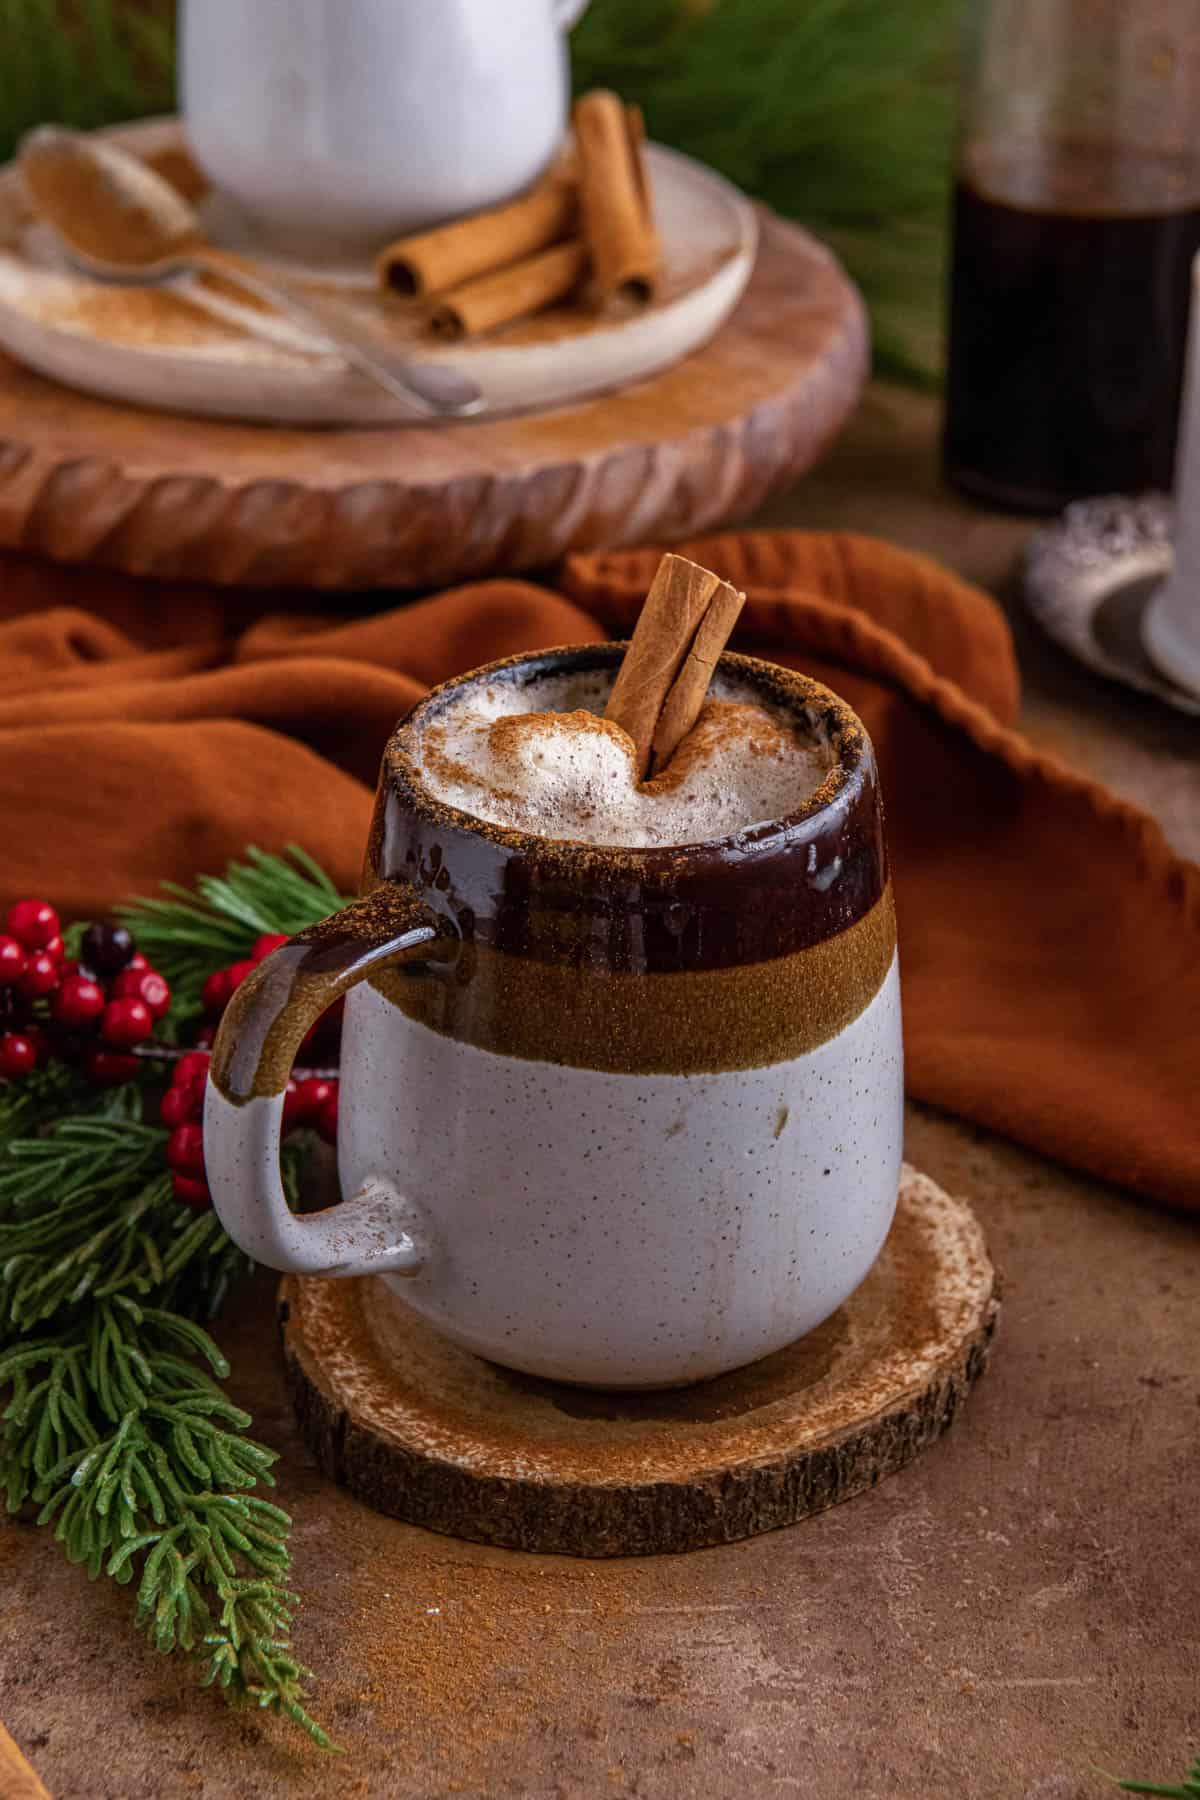 A gingerbread latte in a brown and cream mug with leaves, berries and another mug in the background.